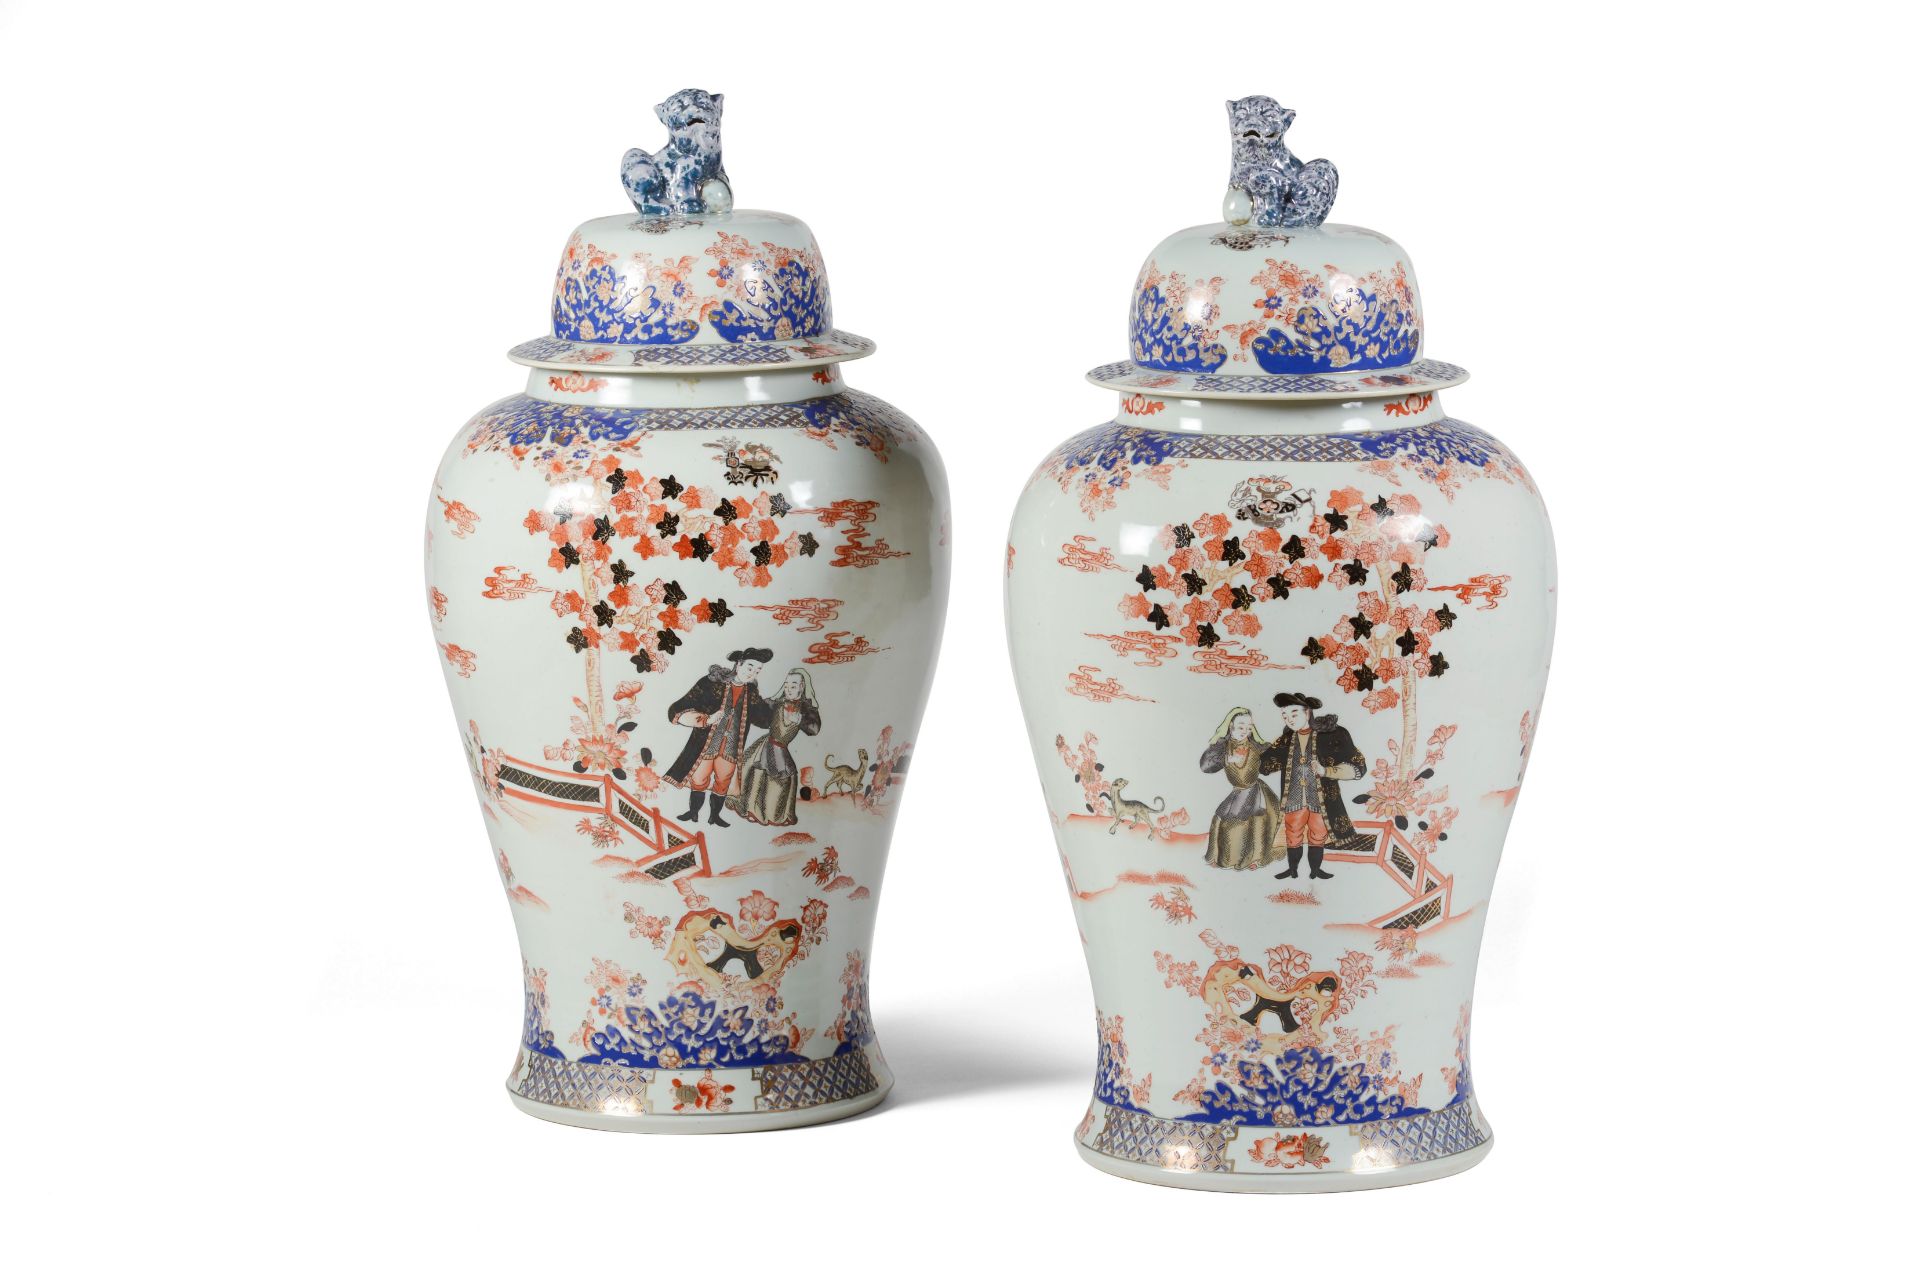 A pair of large vases